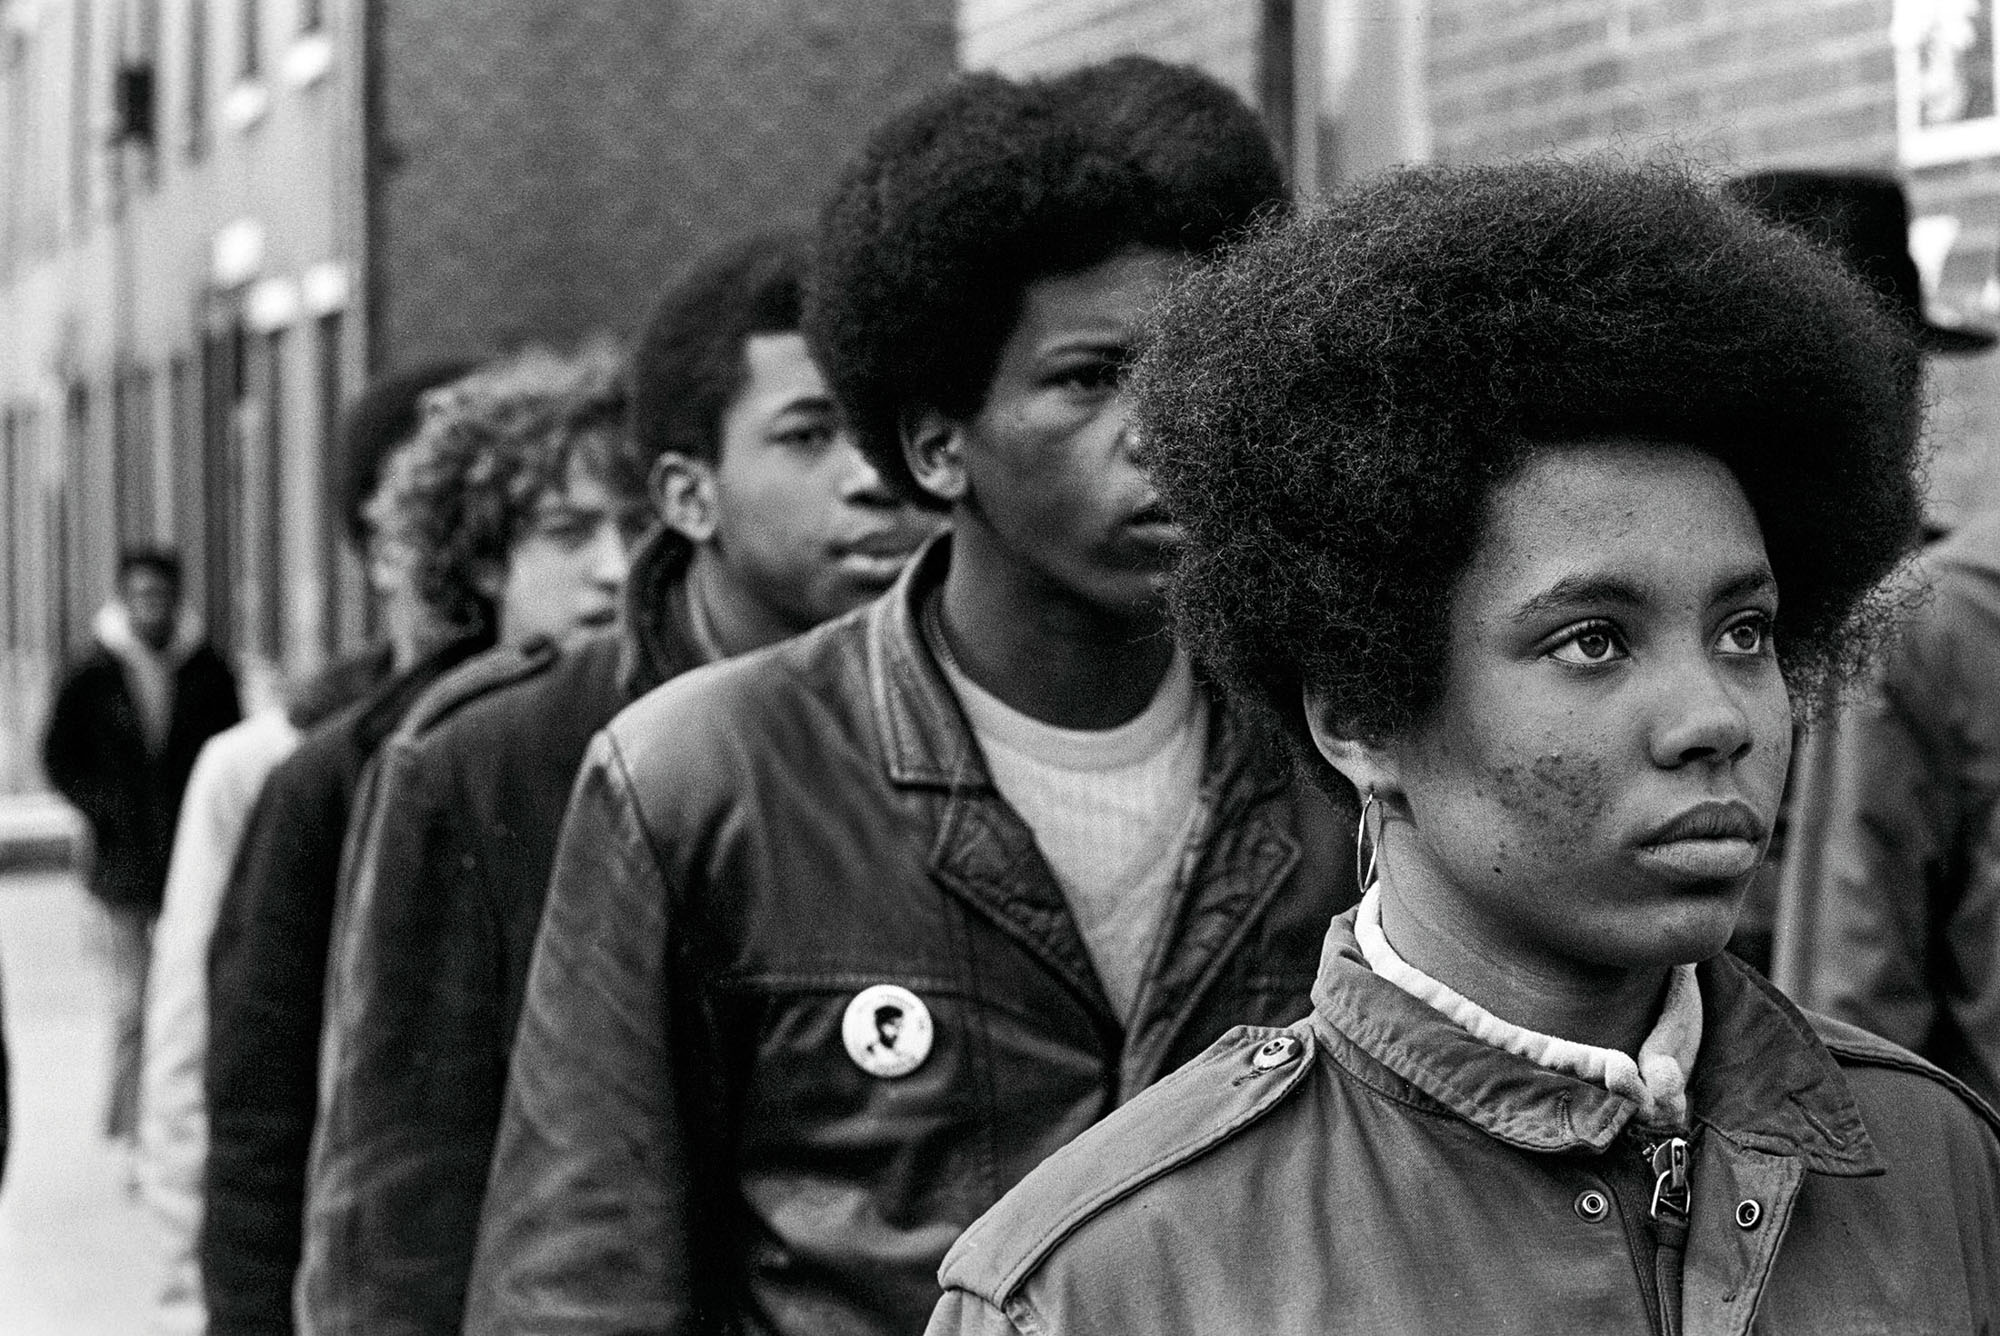 1970 - Philadelphia, Pennsylvania: The Black Panther Party wa s one of the most influential responses to racism and inequality in American history. The Panthers advocated armed self - defense to counter police brutality, and initiated a program of patrolling the police with guns and law books. Their enduring legacy is their programs, like Free Breakfast for Children, which helped to inspire a national movement of community organizing for economic independence, education, nutrition, and health care. Seale believed that “no kid should be running around hungry in school,” a simple credo that lead FBI director J. Edgar Hoover to call the breakfast program, “the greatest threat to efforts by authorities to neutralize the BPP and destroy what it stands for.”